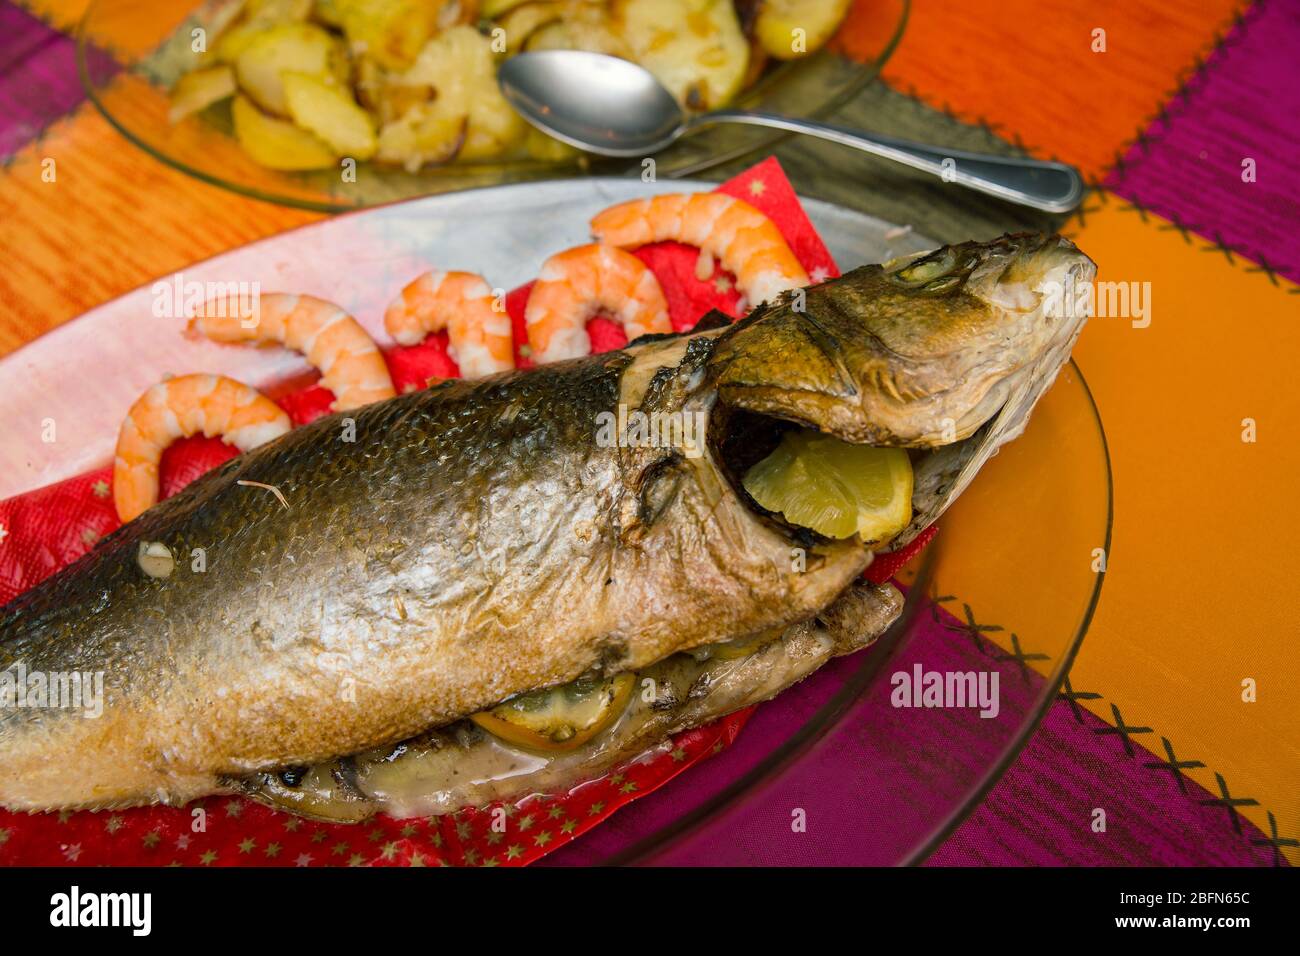 cooked sea bass on a glass dish and a plate with baked potato garnish Stock Photo